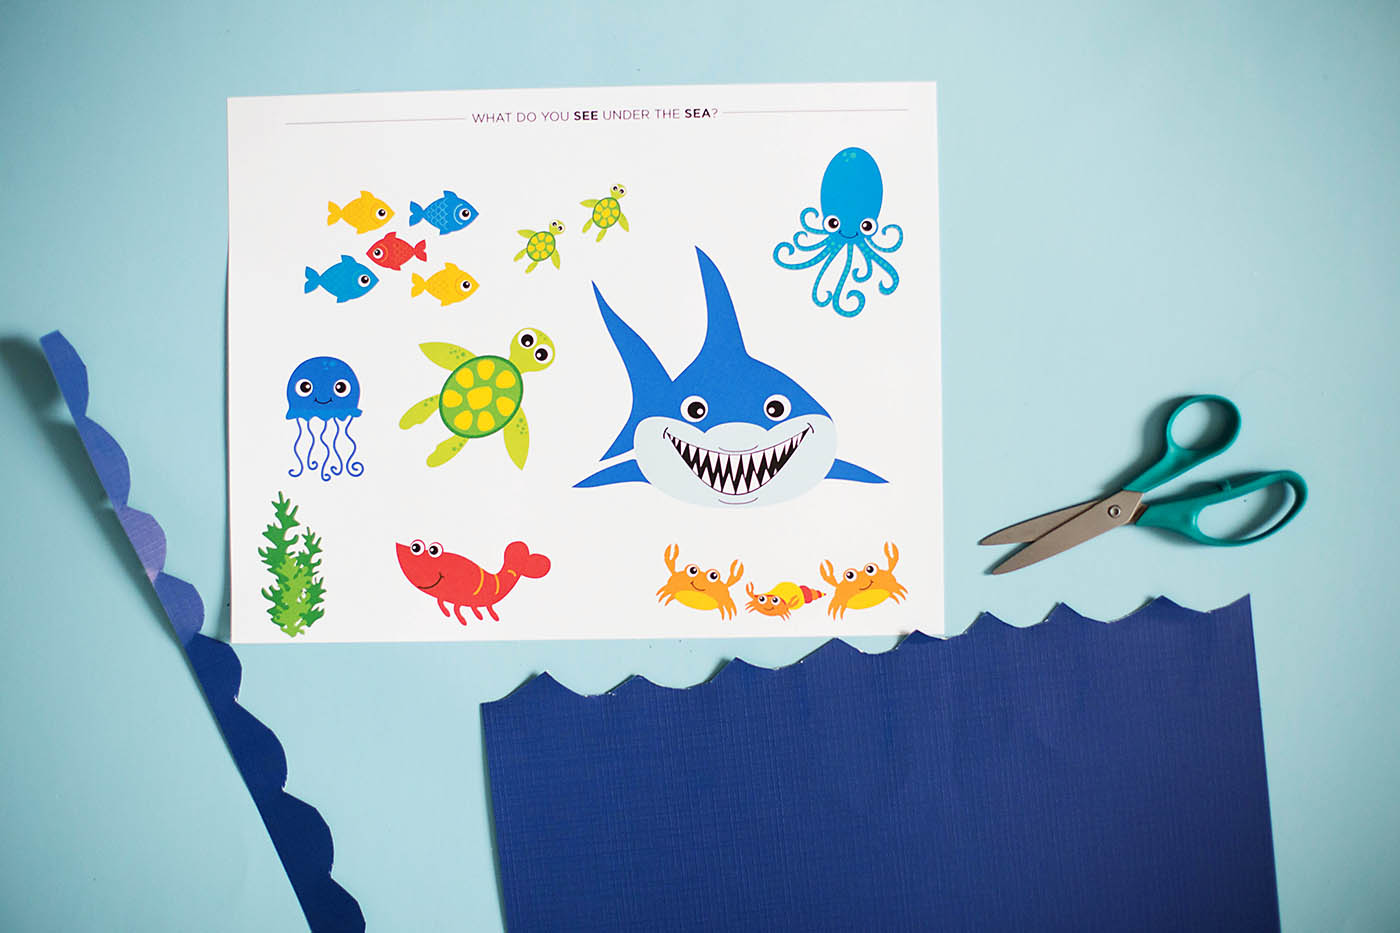 An ocean themed cutting craft perfect for kids learning to use scissors a 4 year-old milestone!